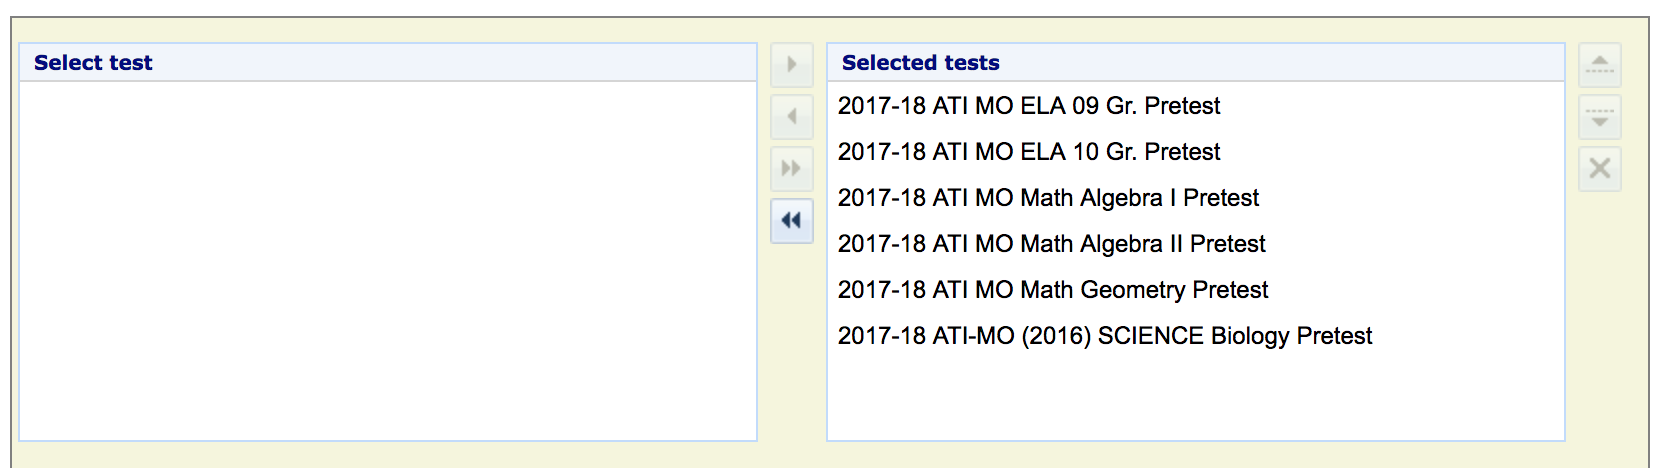 an example showing all tests selected